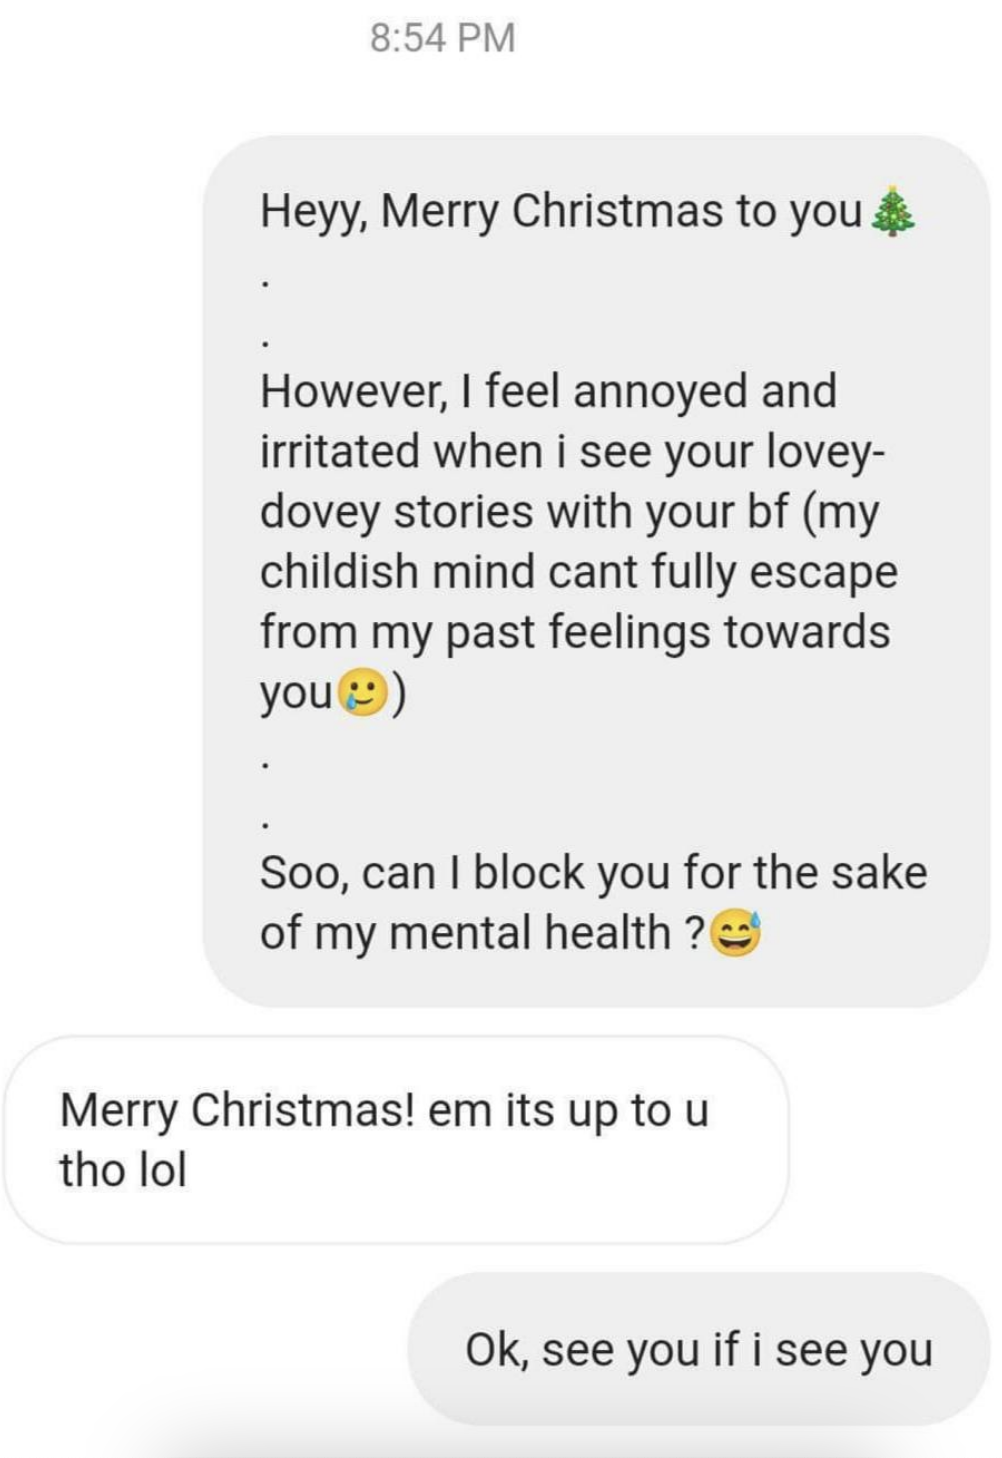 On Christmas, person who gets annoyed when they see this person&#x27;s lovey-dovey posts with their bf asks if they can block them for their mental health, and are told &quot;Merry Xmas, it&#x27;s up to you&quot;